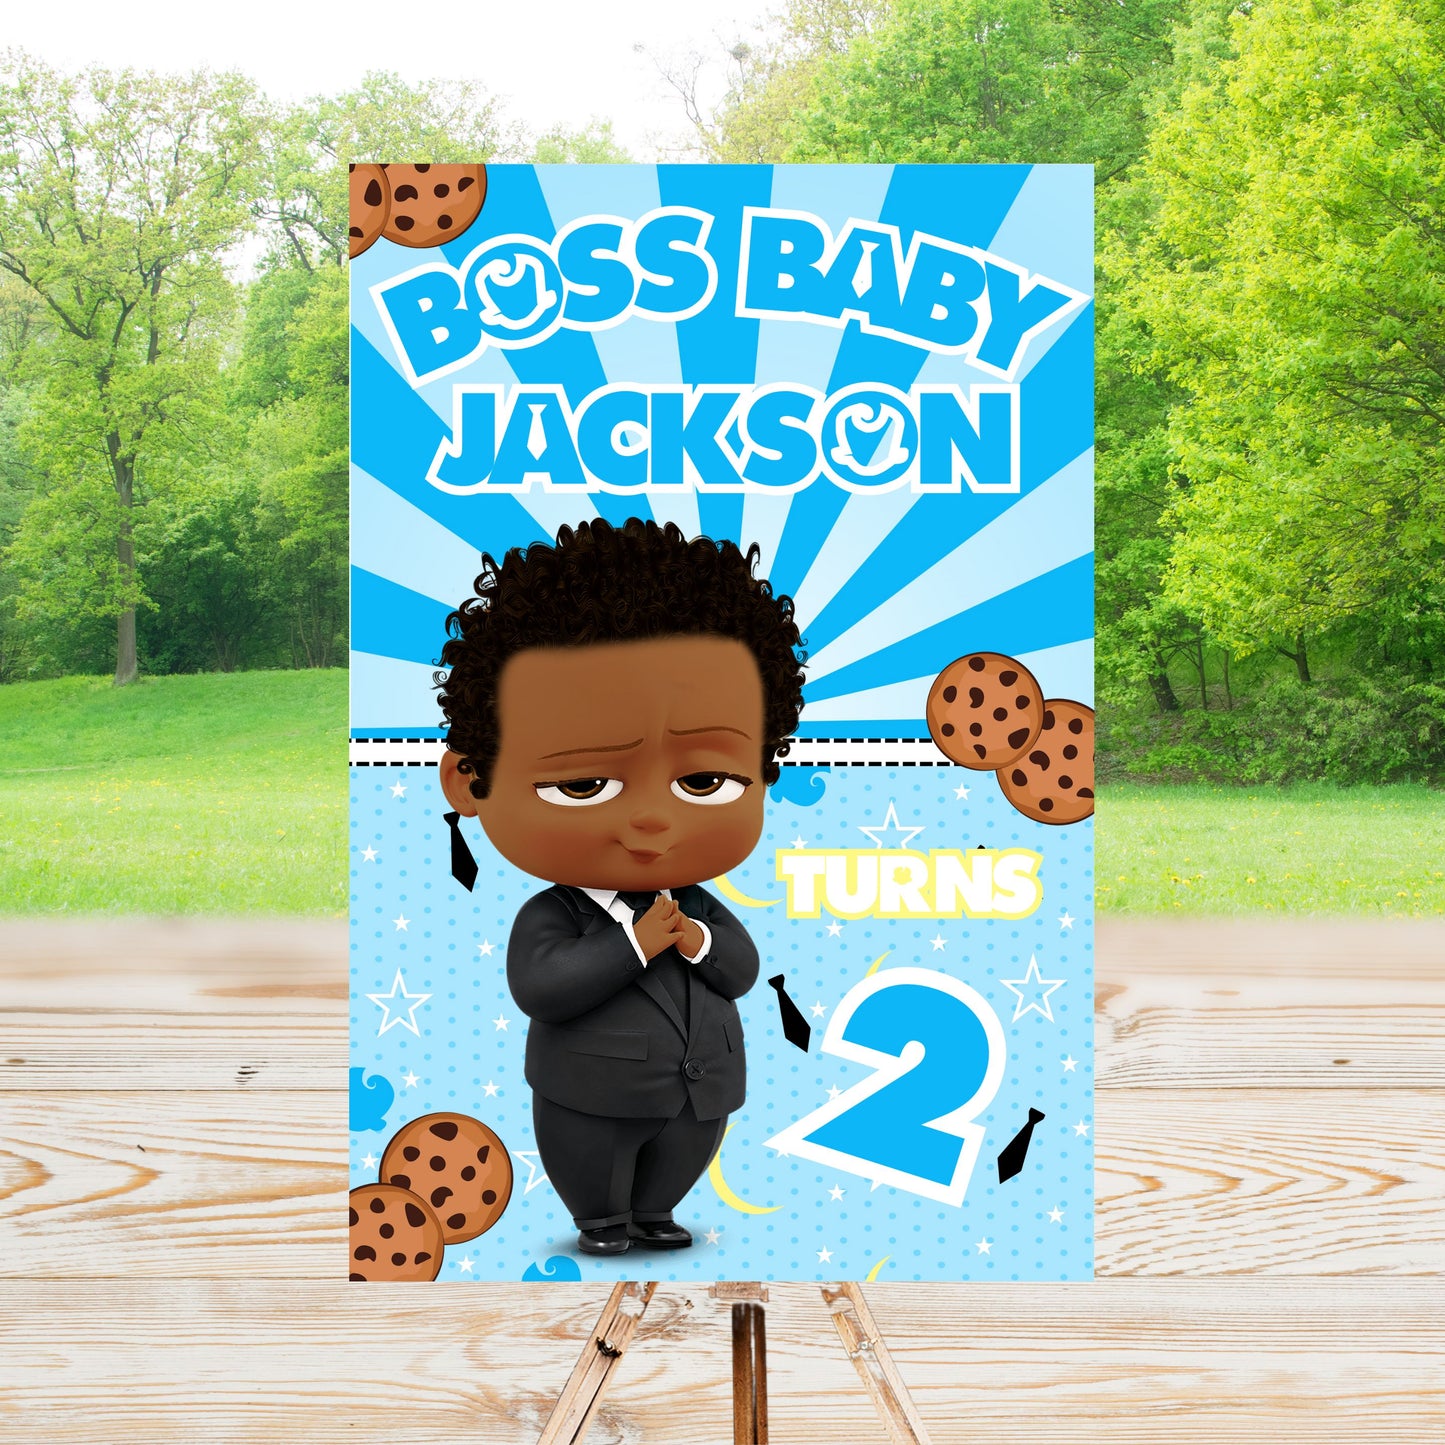 Boss Baby Party Sign | Editable Text with Canva | Digital Poster | Edit | Save | Download | Print